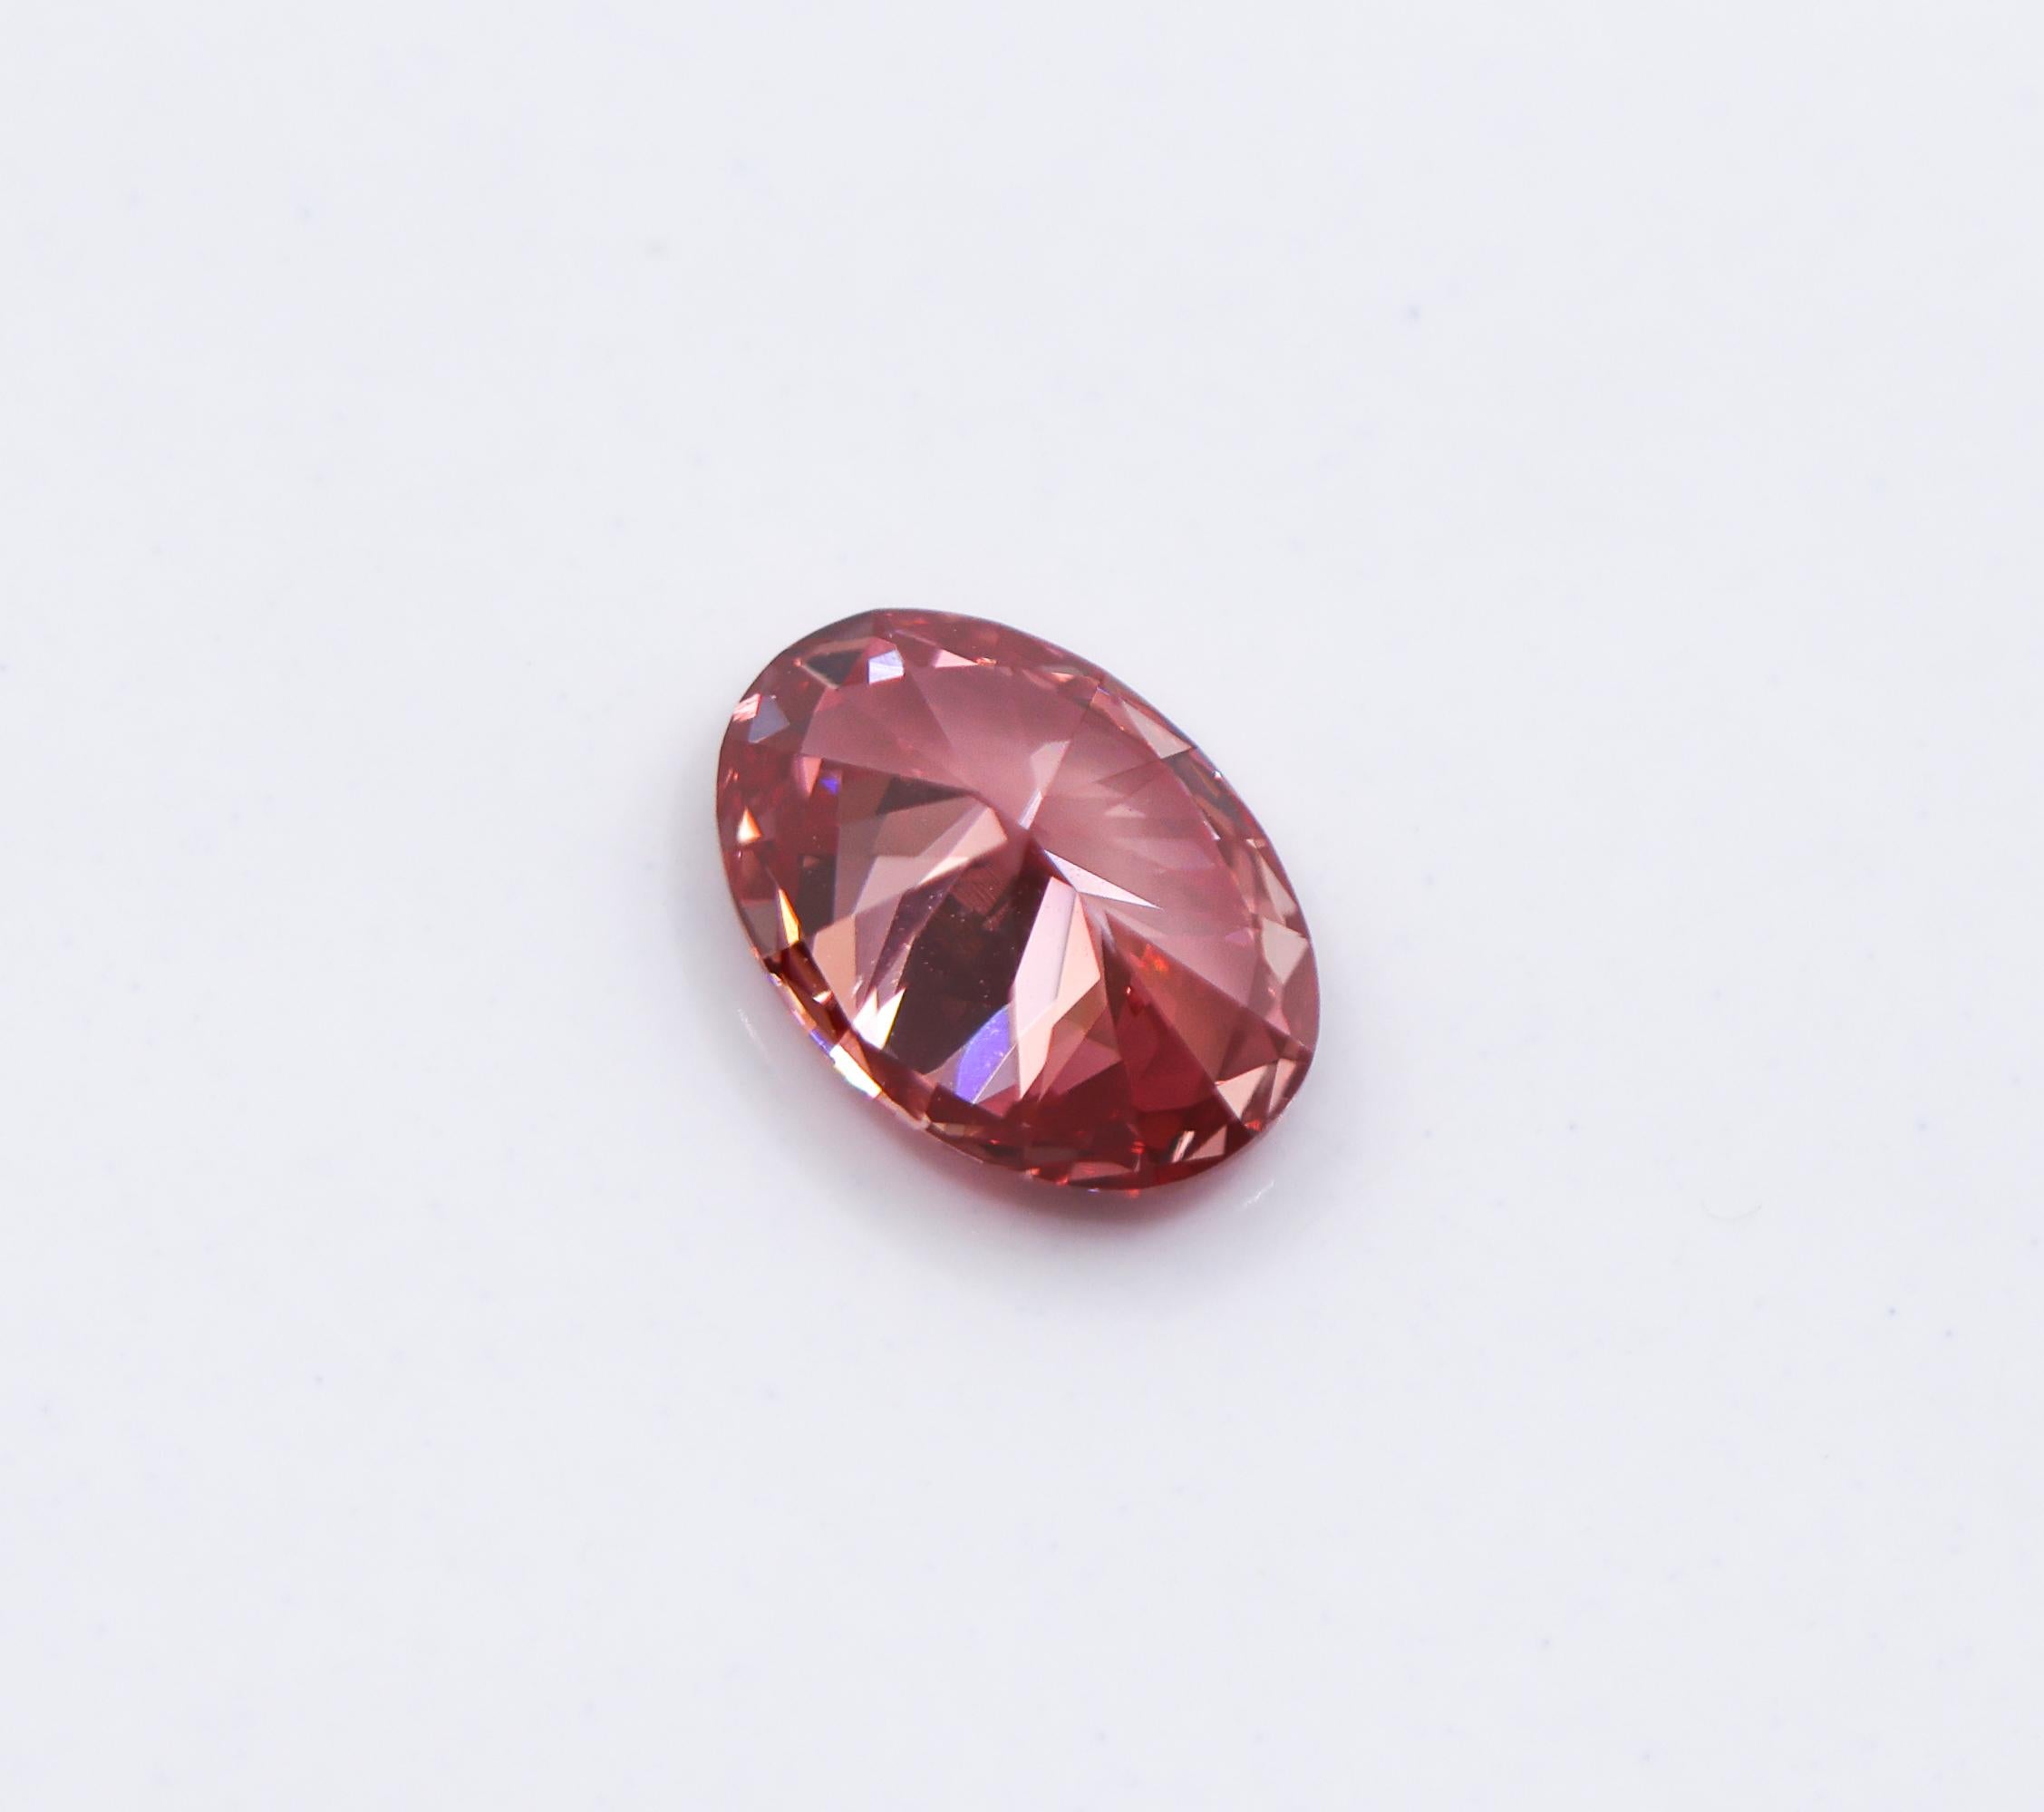 Modernist GIA Certified 2.31 Carat VVS1 Fancy Deep Pink Diamond Natural Earth Mined For Sale